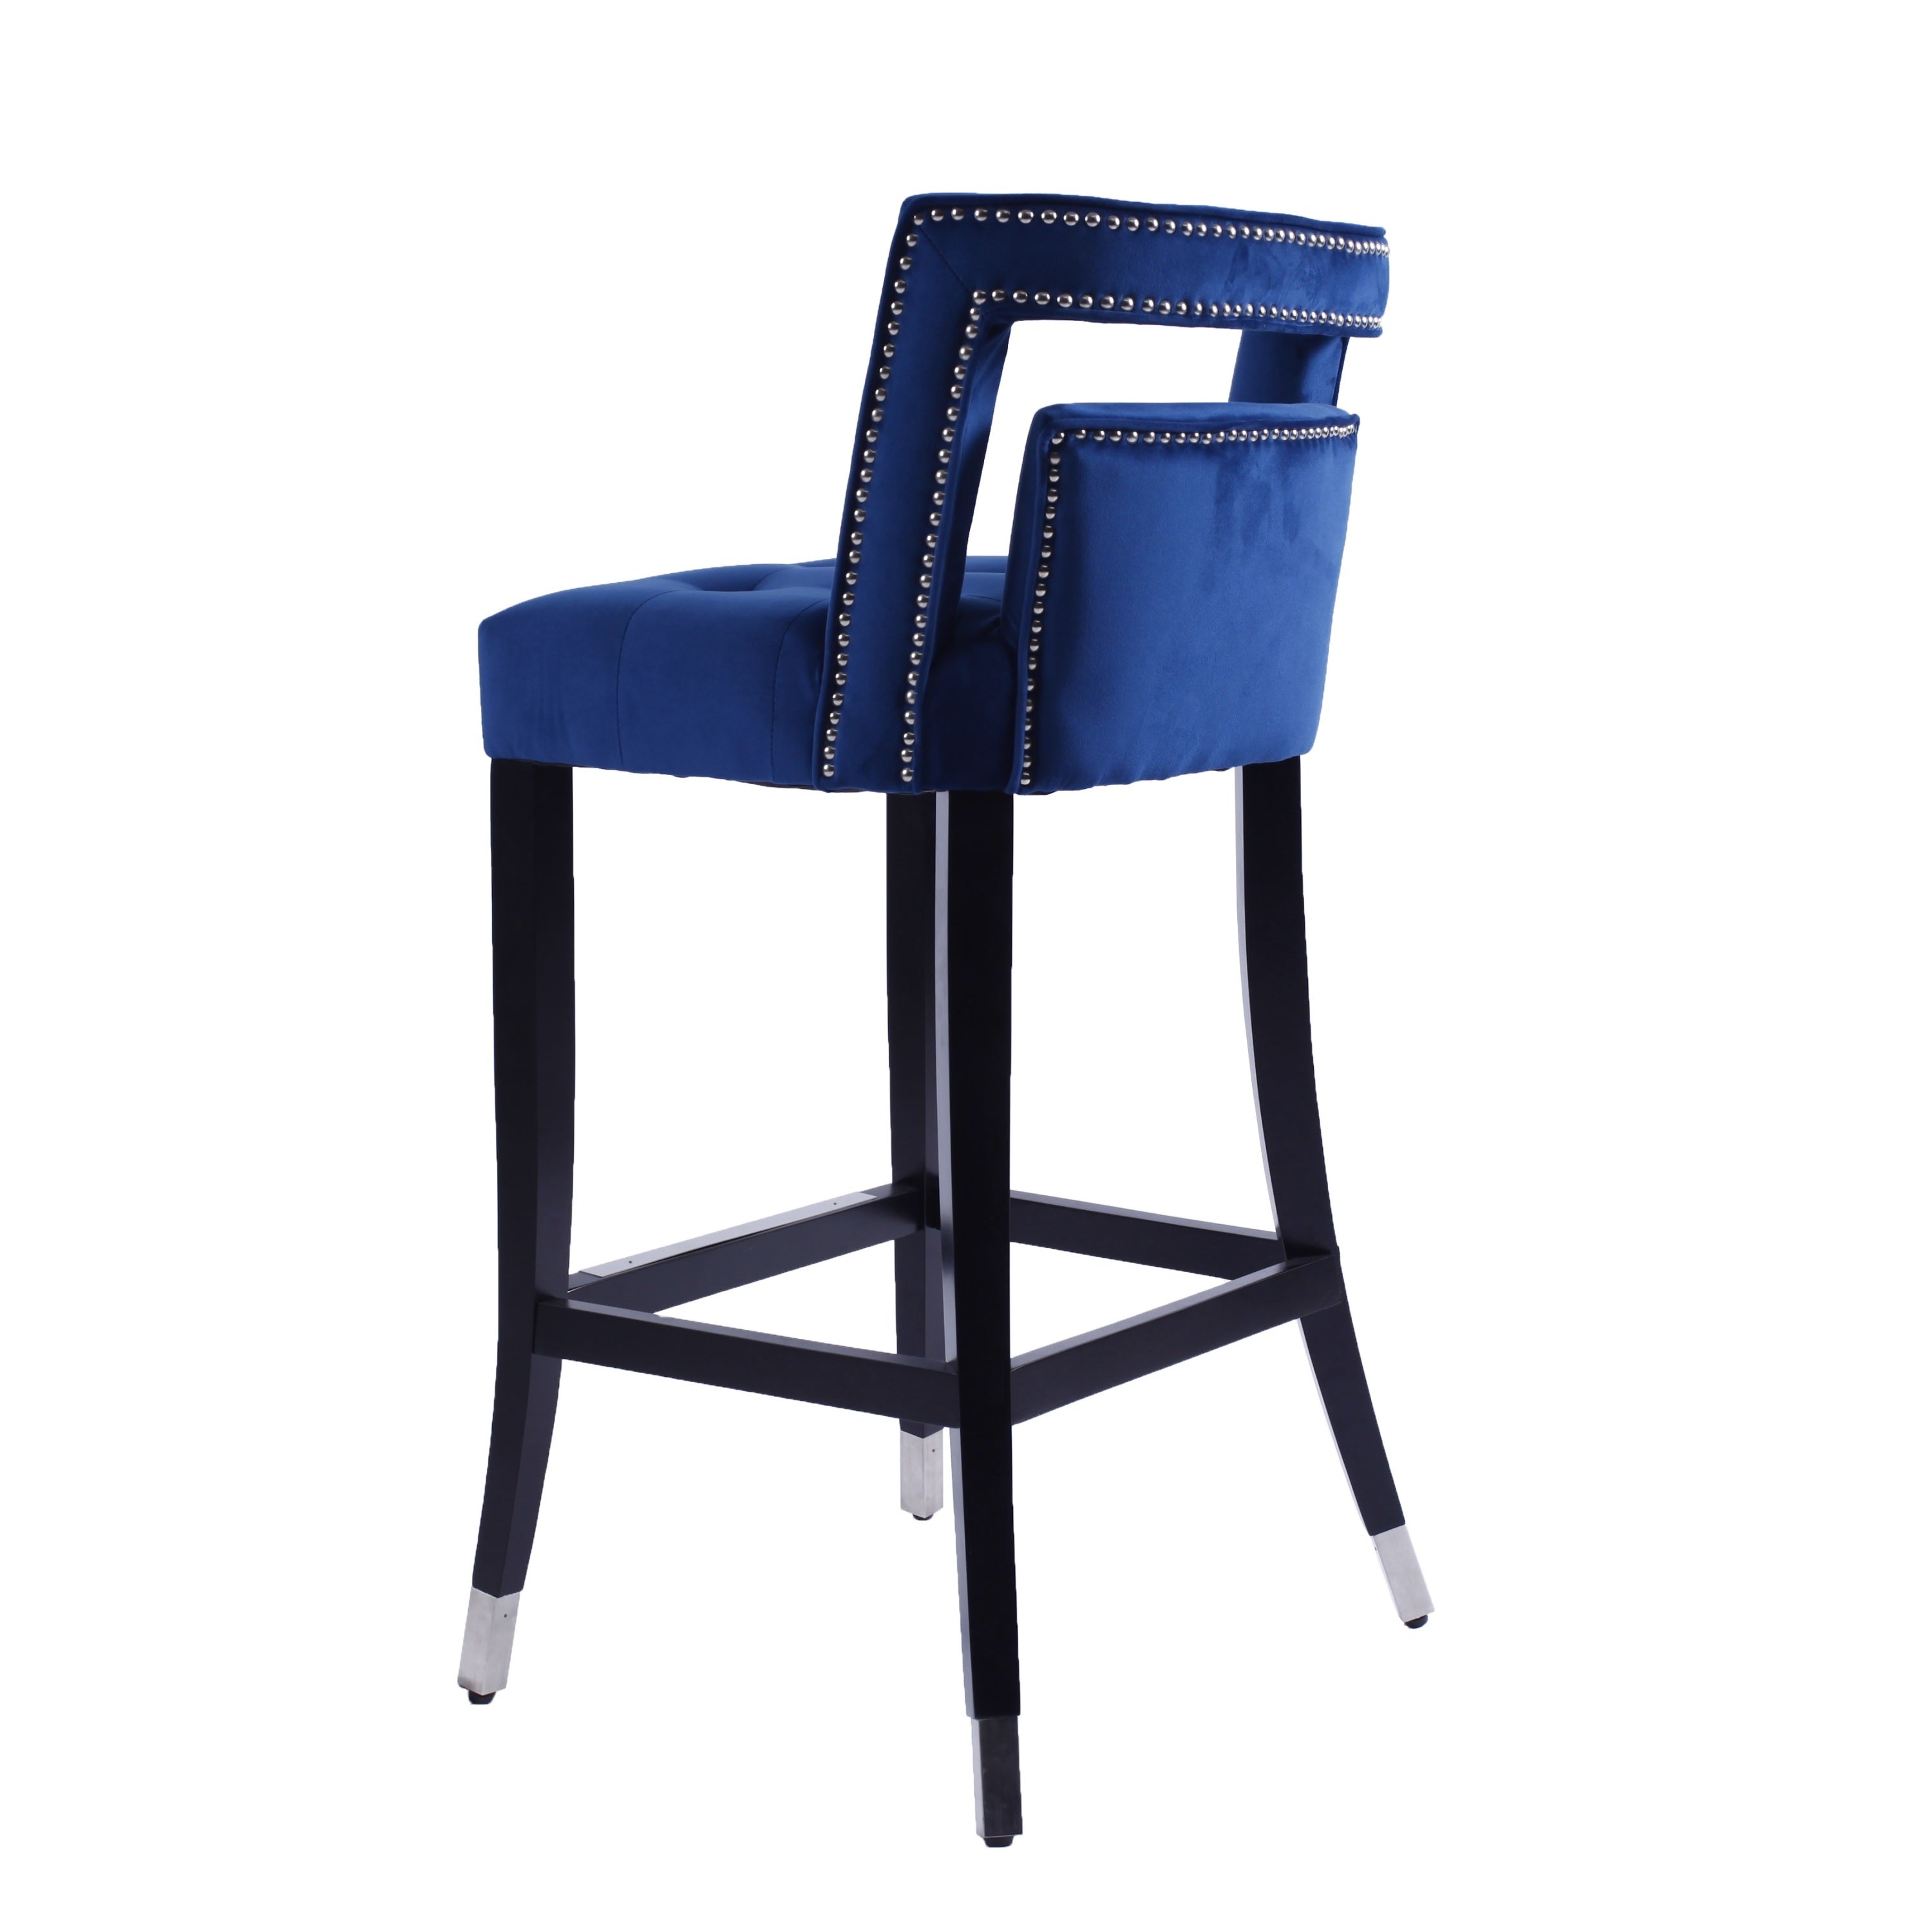 Suede Velvet Barstool with nailheads Living Room Chair 2 pcs Set - 30 inch Seater height - Navy